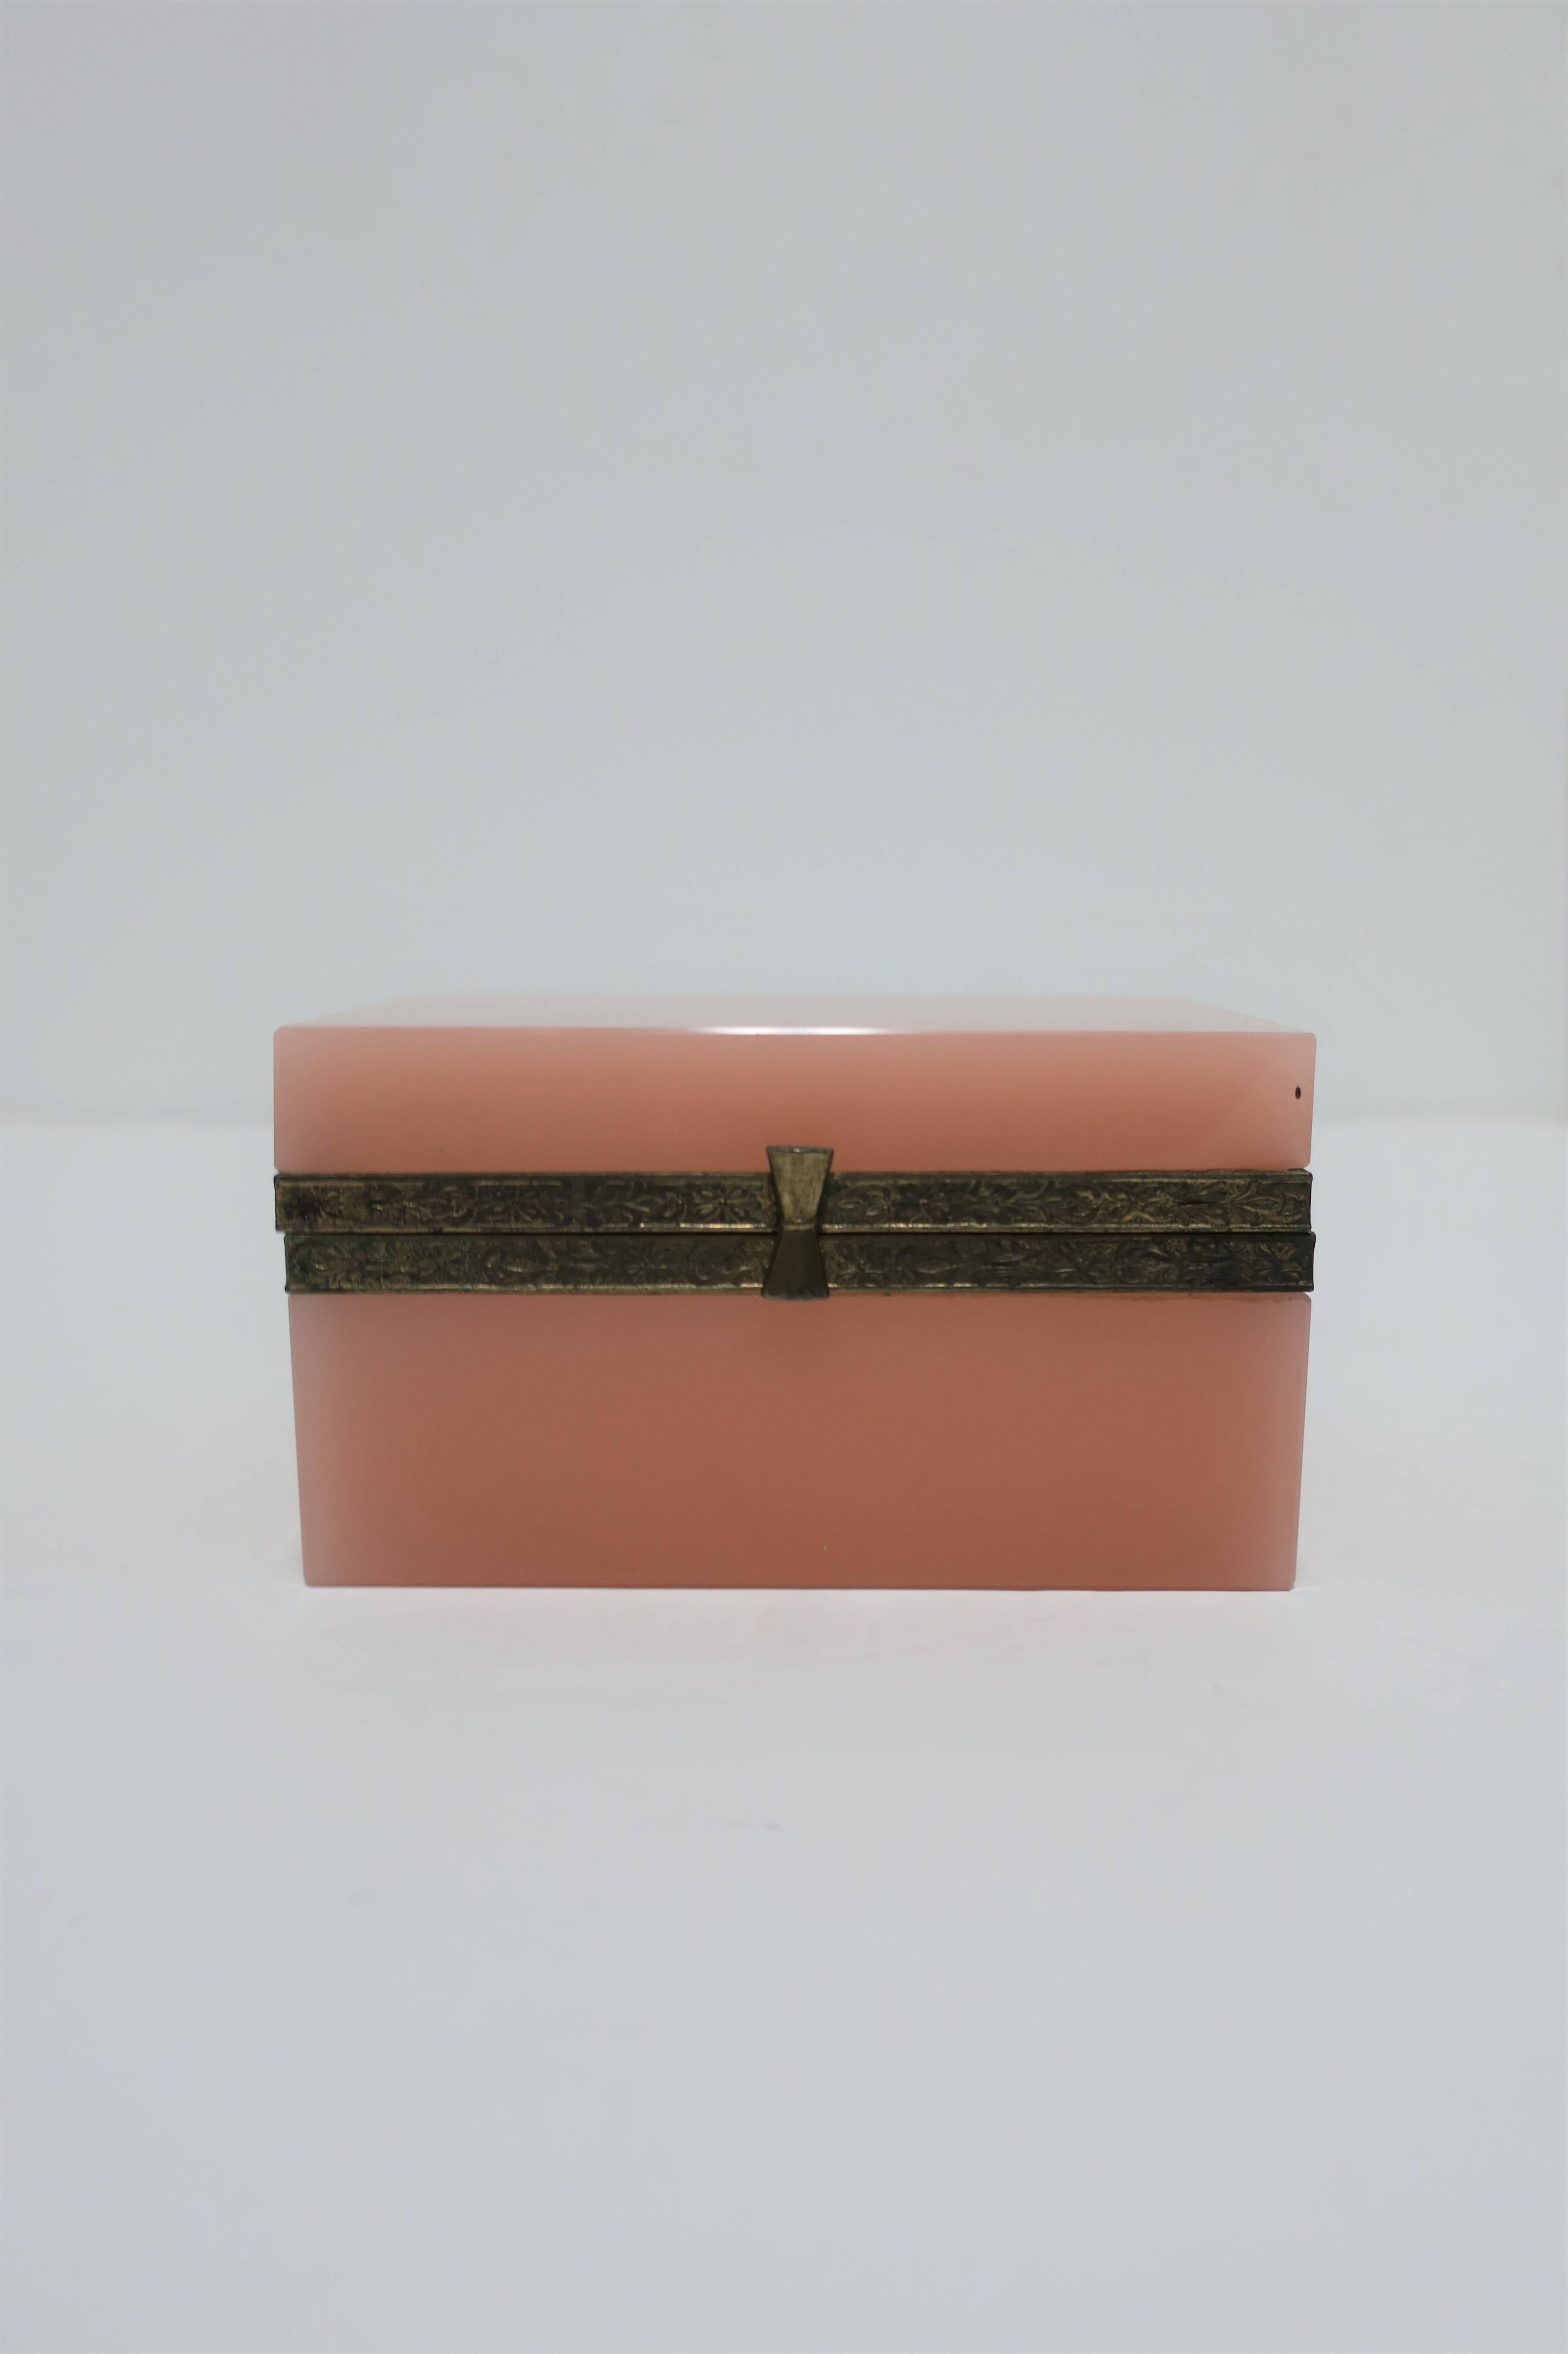 A beautiful vintage Modern Italian pink Murano art glass jewelry or vantiy box with decorative brass hinge, Italy. 

Box measures: 5.25 in. W x 3.5 in. D x 3 in. H. 

Item available here online. By request, item can be made available by appointment